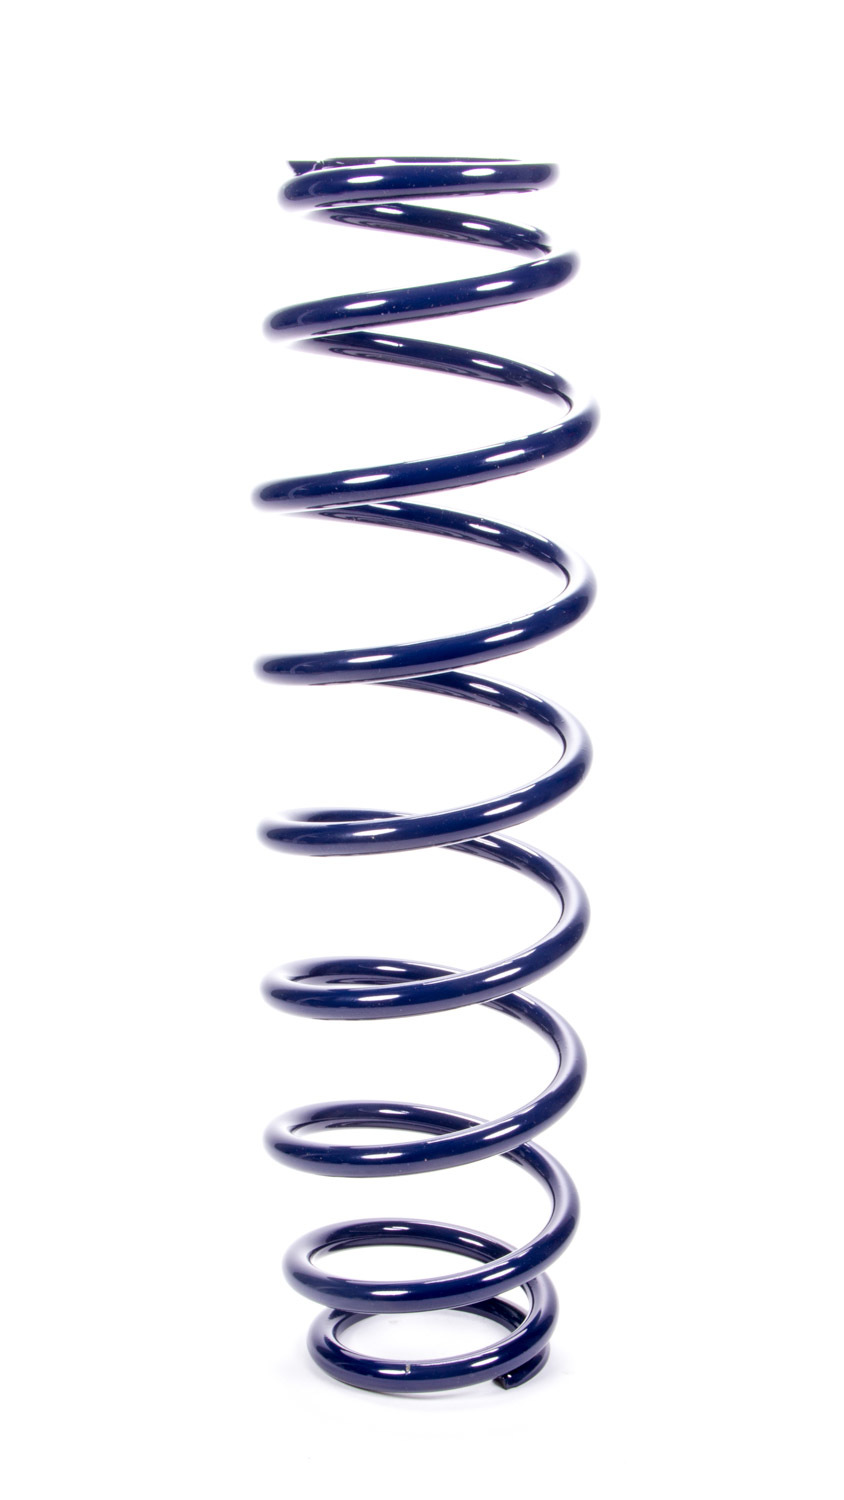 Hyperco 12B0300UHT Coil Spring, UHT Barrel, Coil-Over, 2.500 in ID, 12.000 in Length, 300 lb/in Spring Rate, Steel, Blue Powder Coat, Each